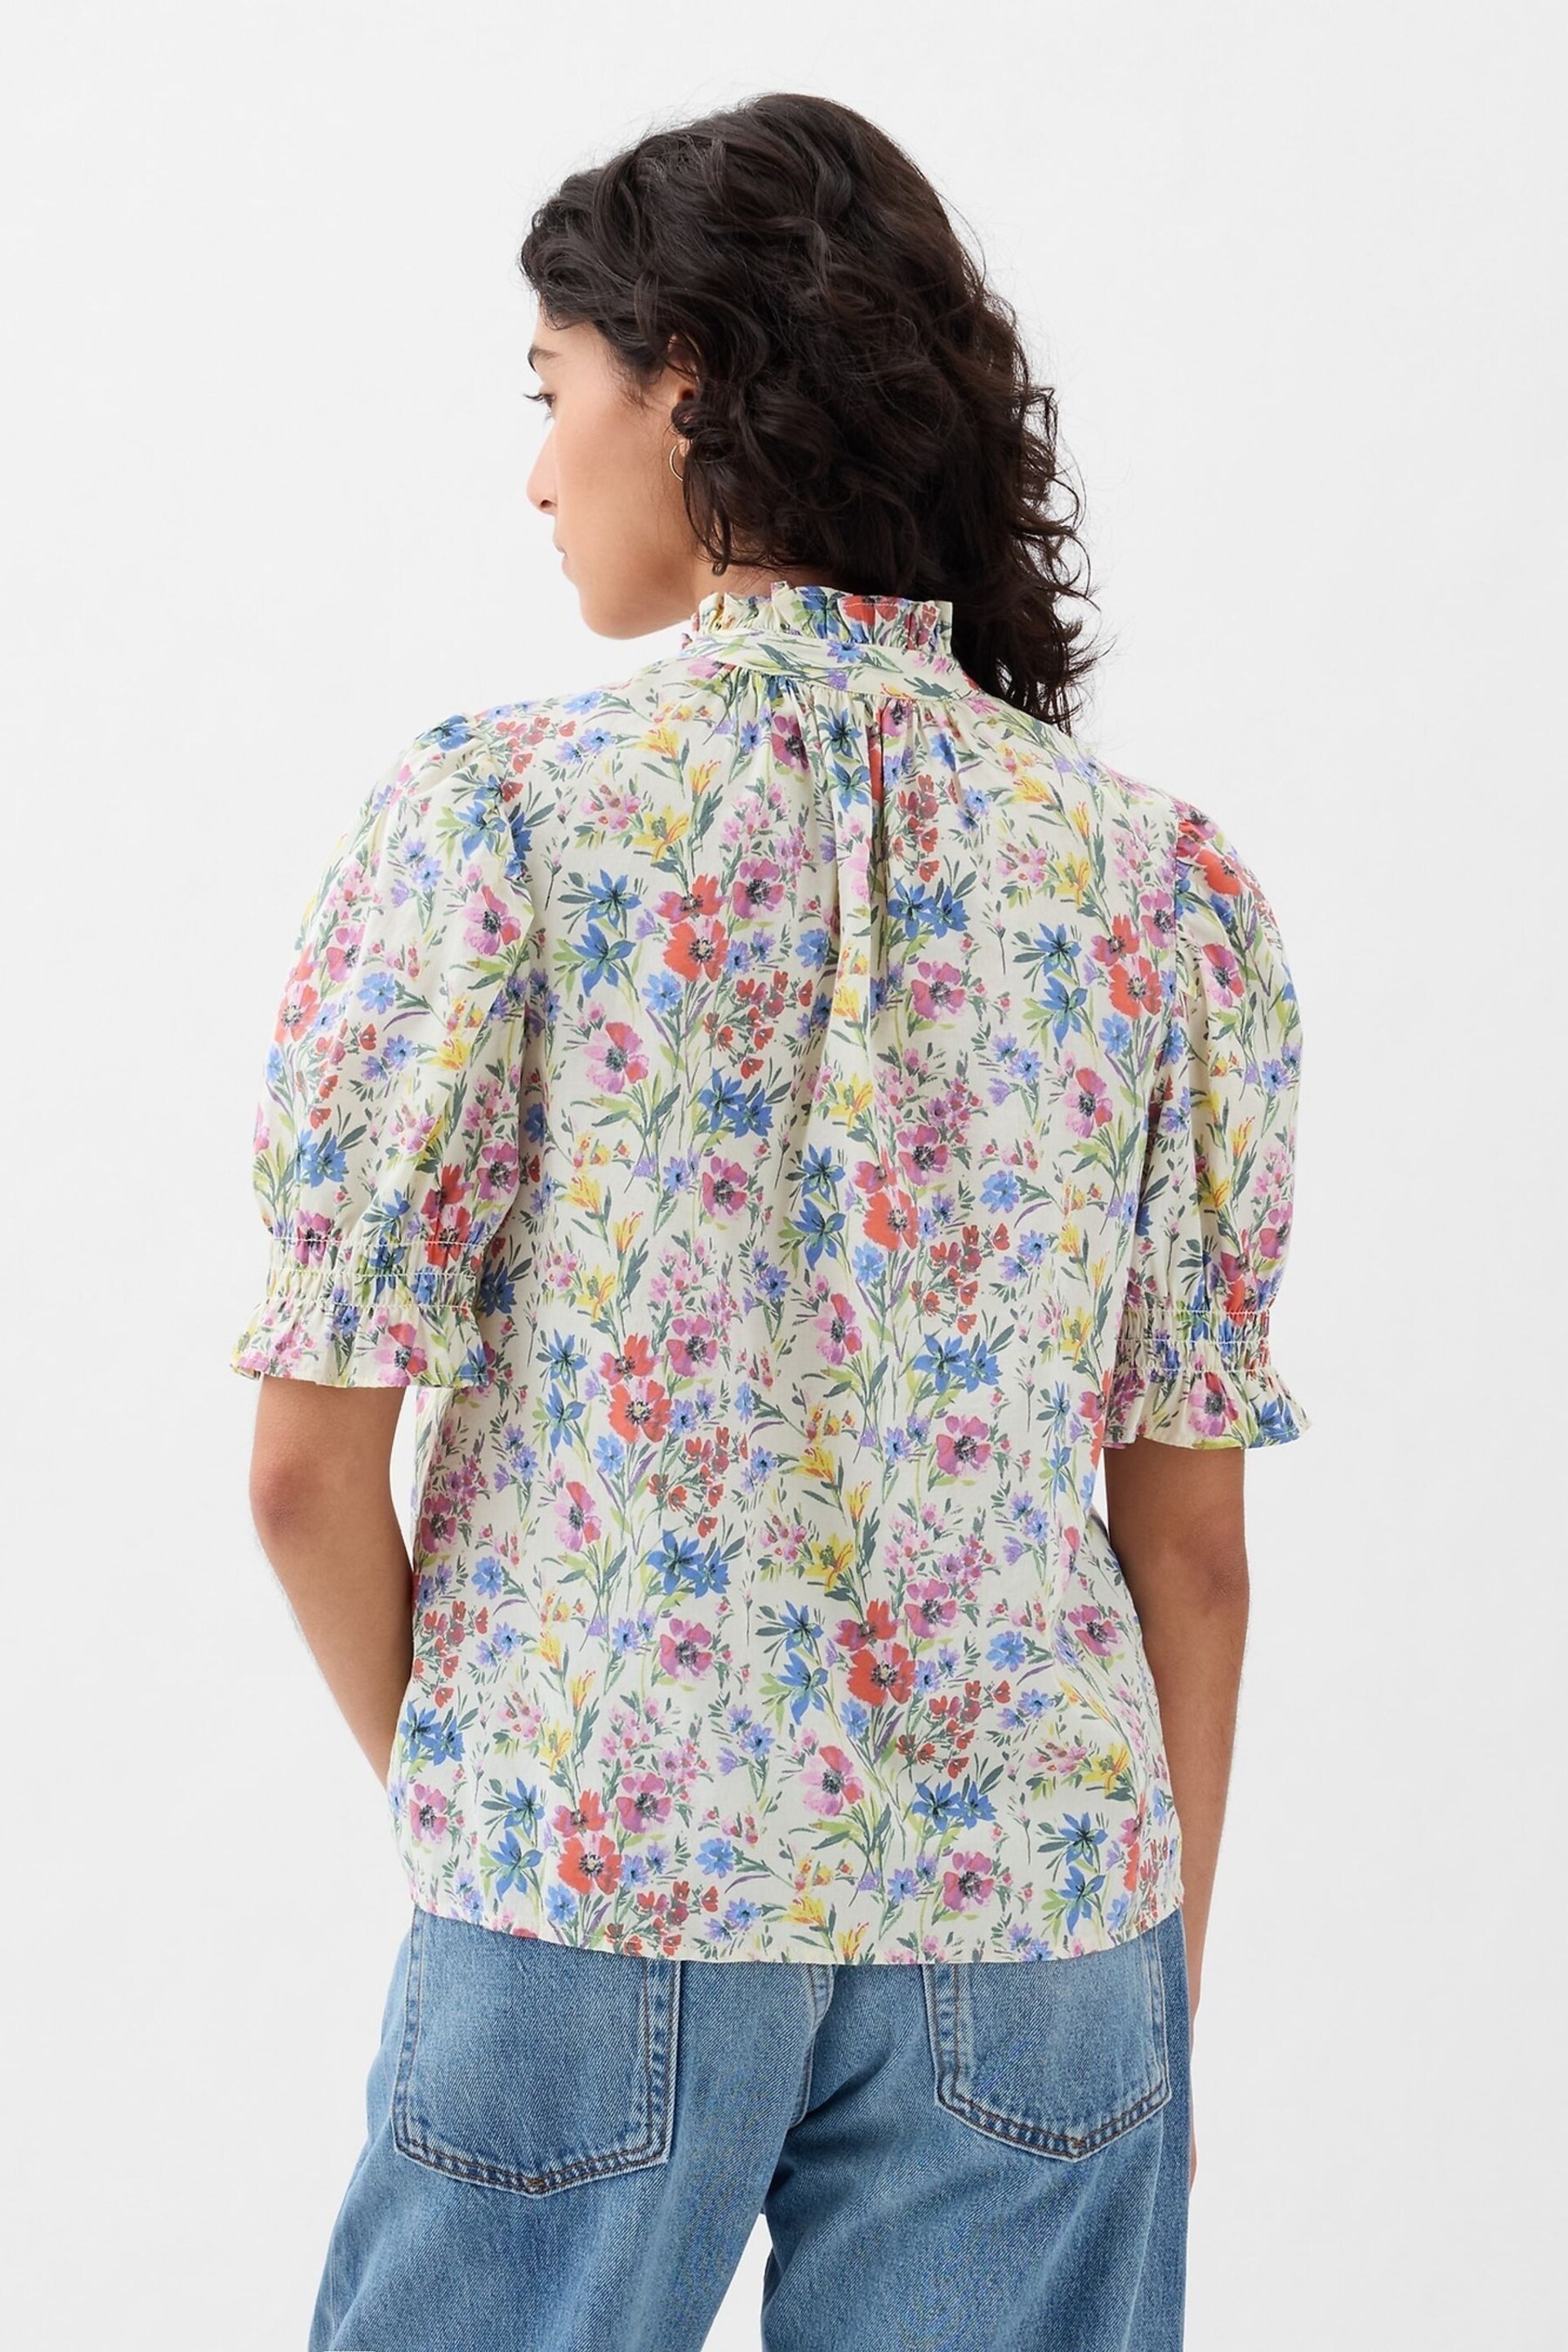 Gap White Floral High Neck Puff Sleeve Button Shirt - Image 2 of 4